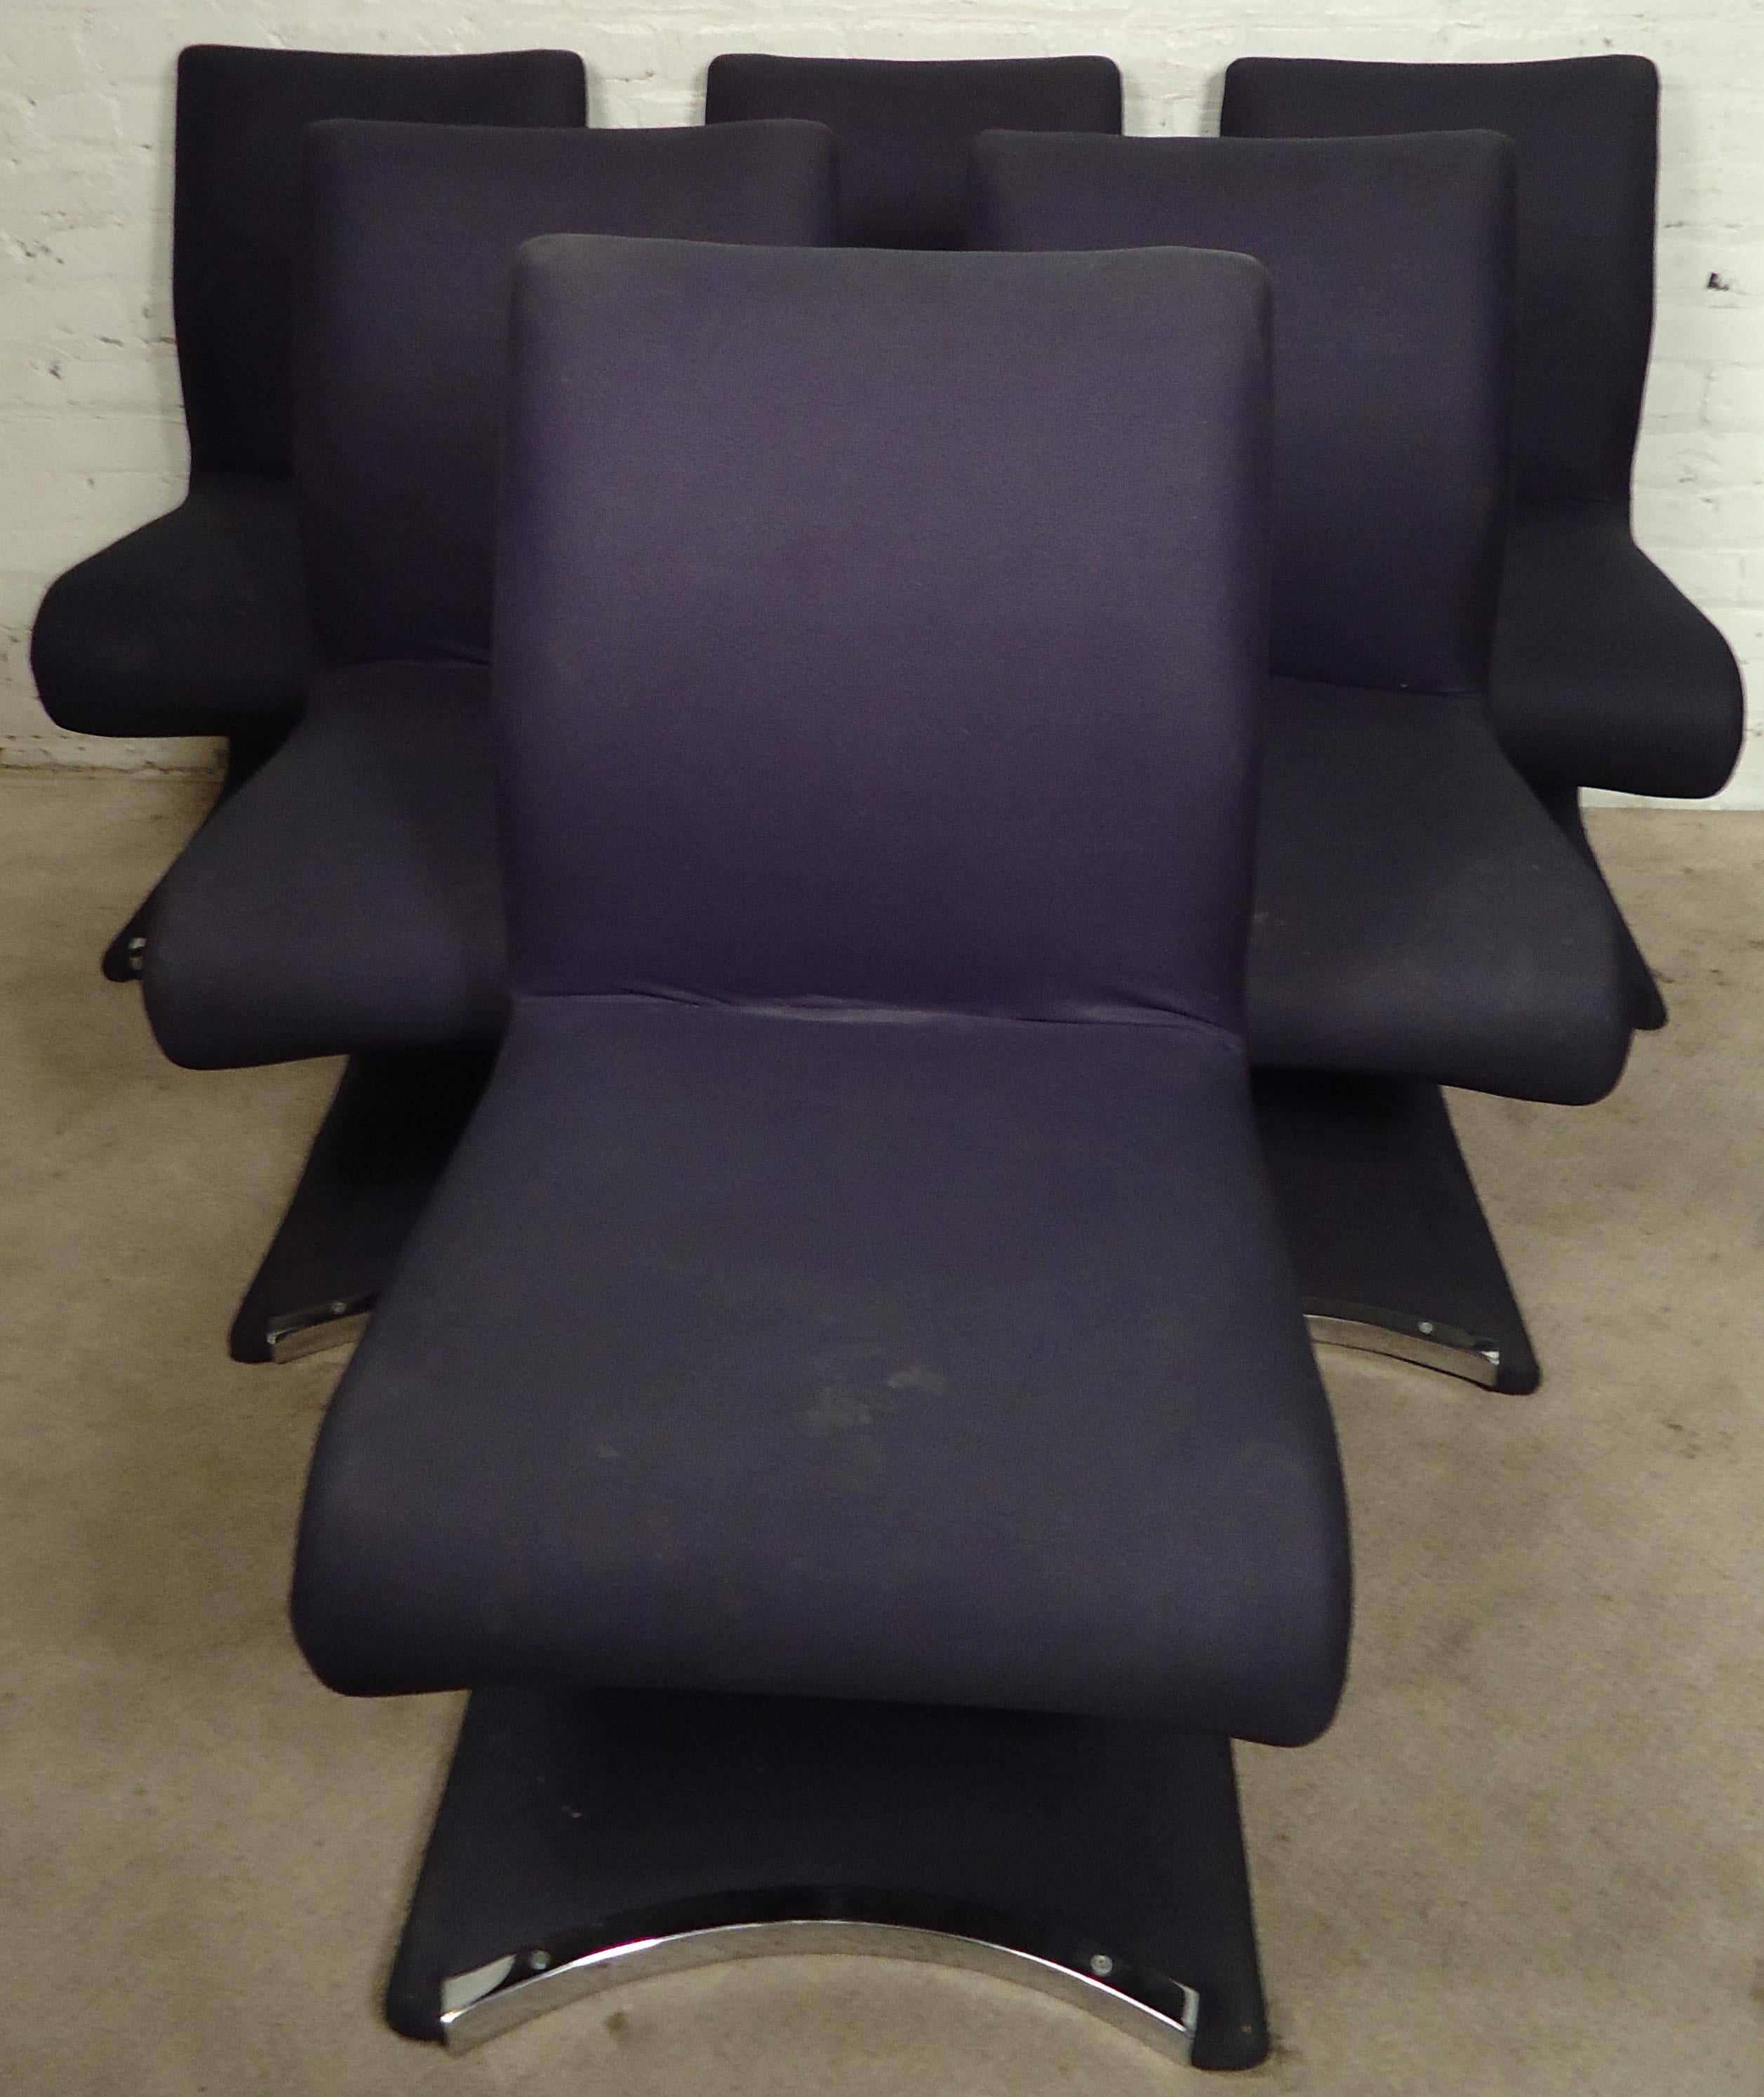 Set of vintage-modern S chairs designed by Verner Panton.

Please confirm item location NY or NJ with dealer.